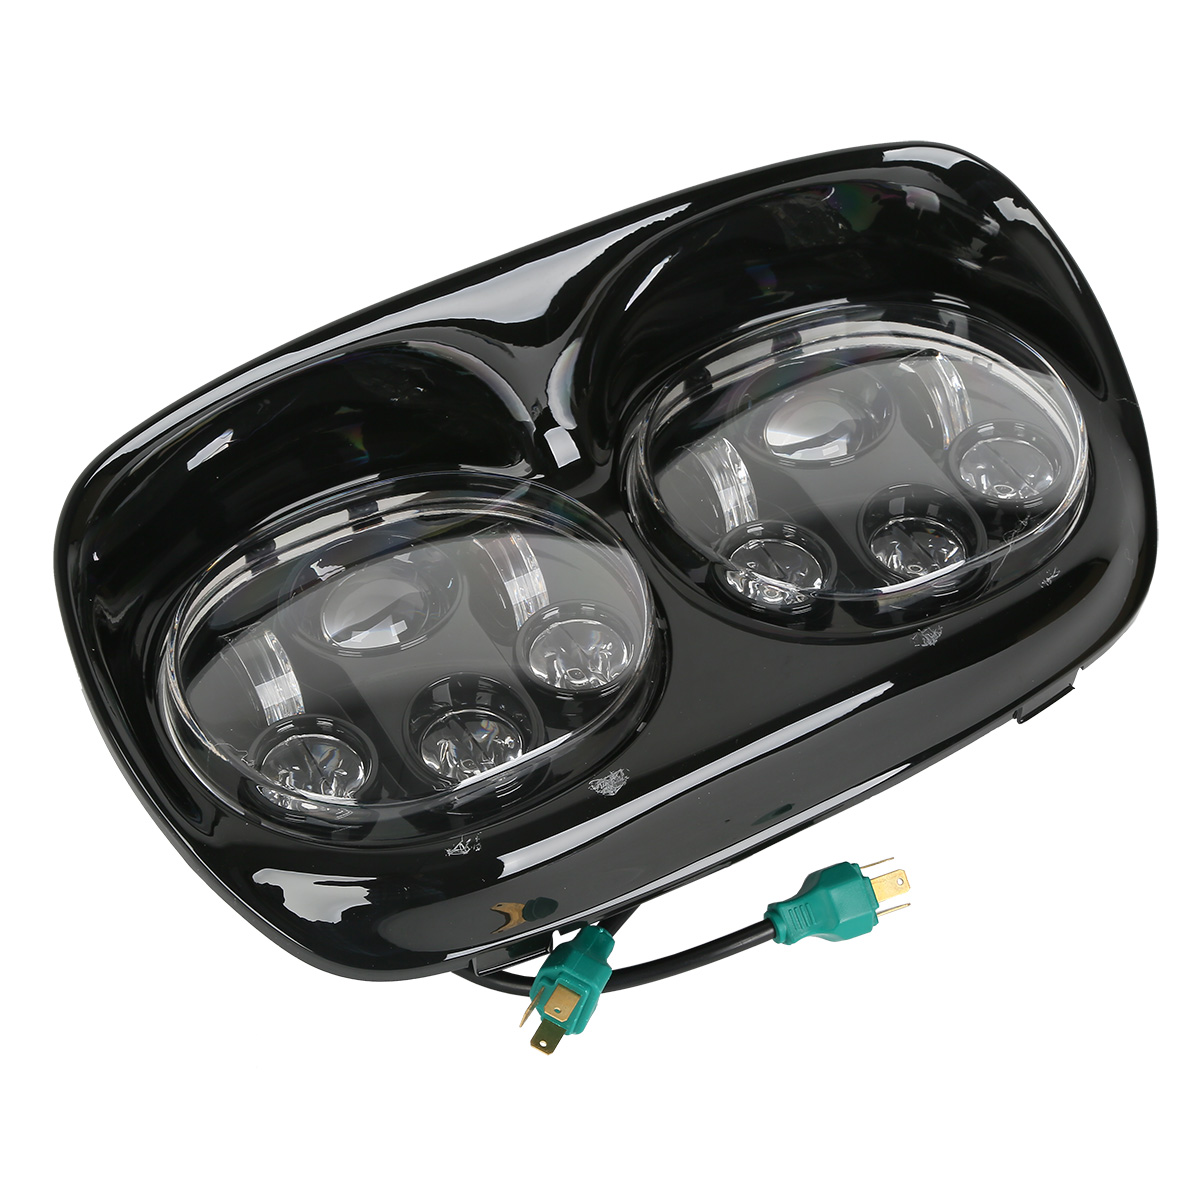 5.75" Dual LED Headlight HeadLamp Projector For 98-13 Harley Road Glide NEW 